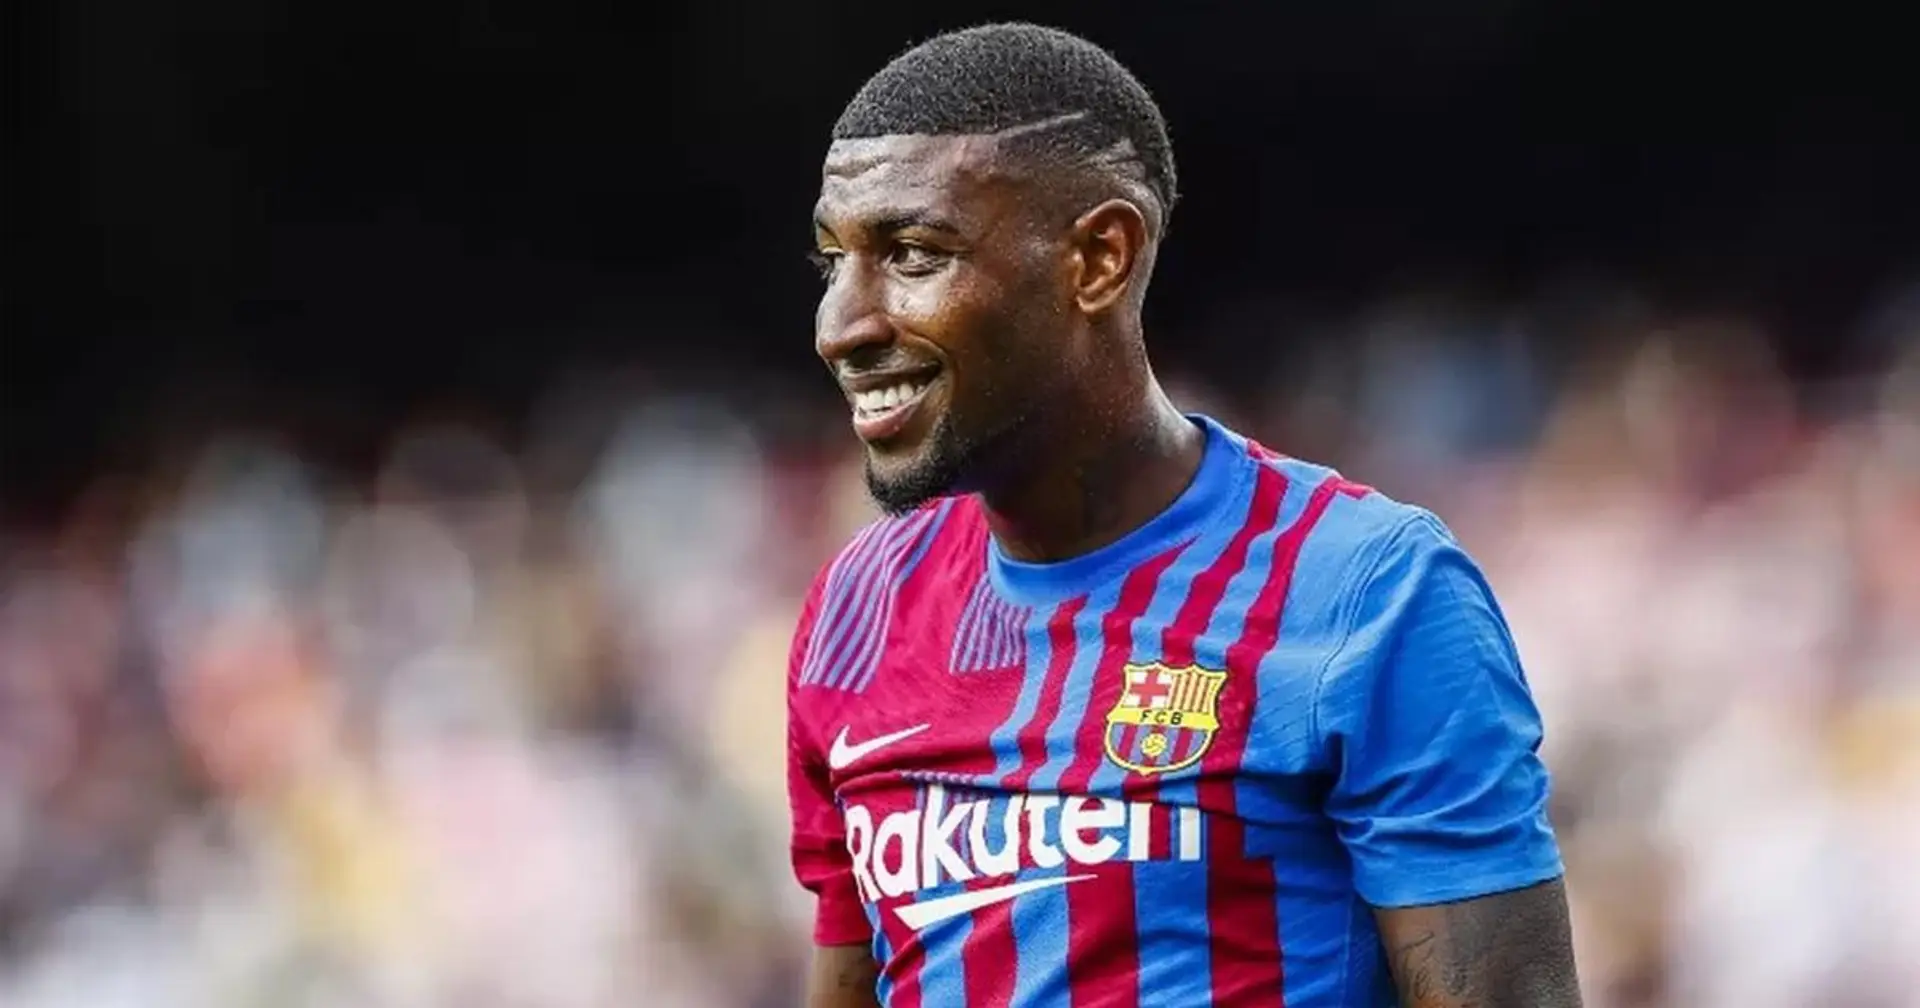 Emerson doesn't want to leave Barca despite club being in advanced talks with Tottenham (reliability: 4 stars)